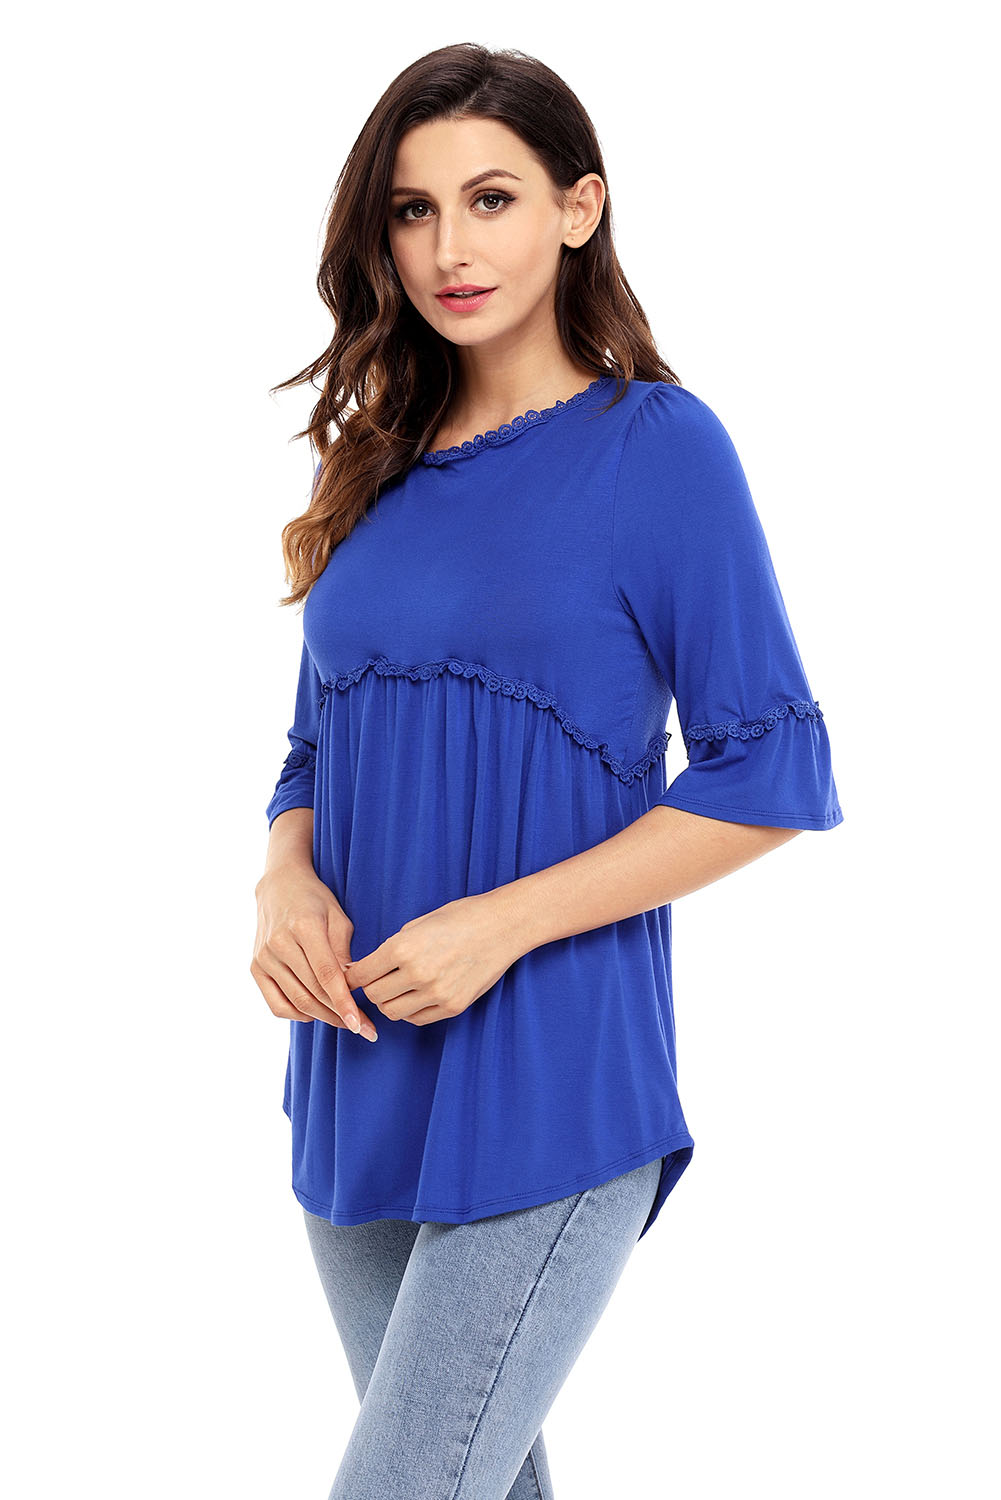 BY250232-5 Blue Babydoll Long Tunic Top